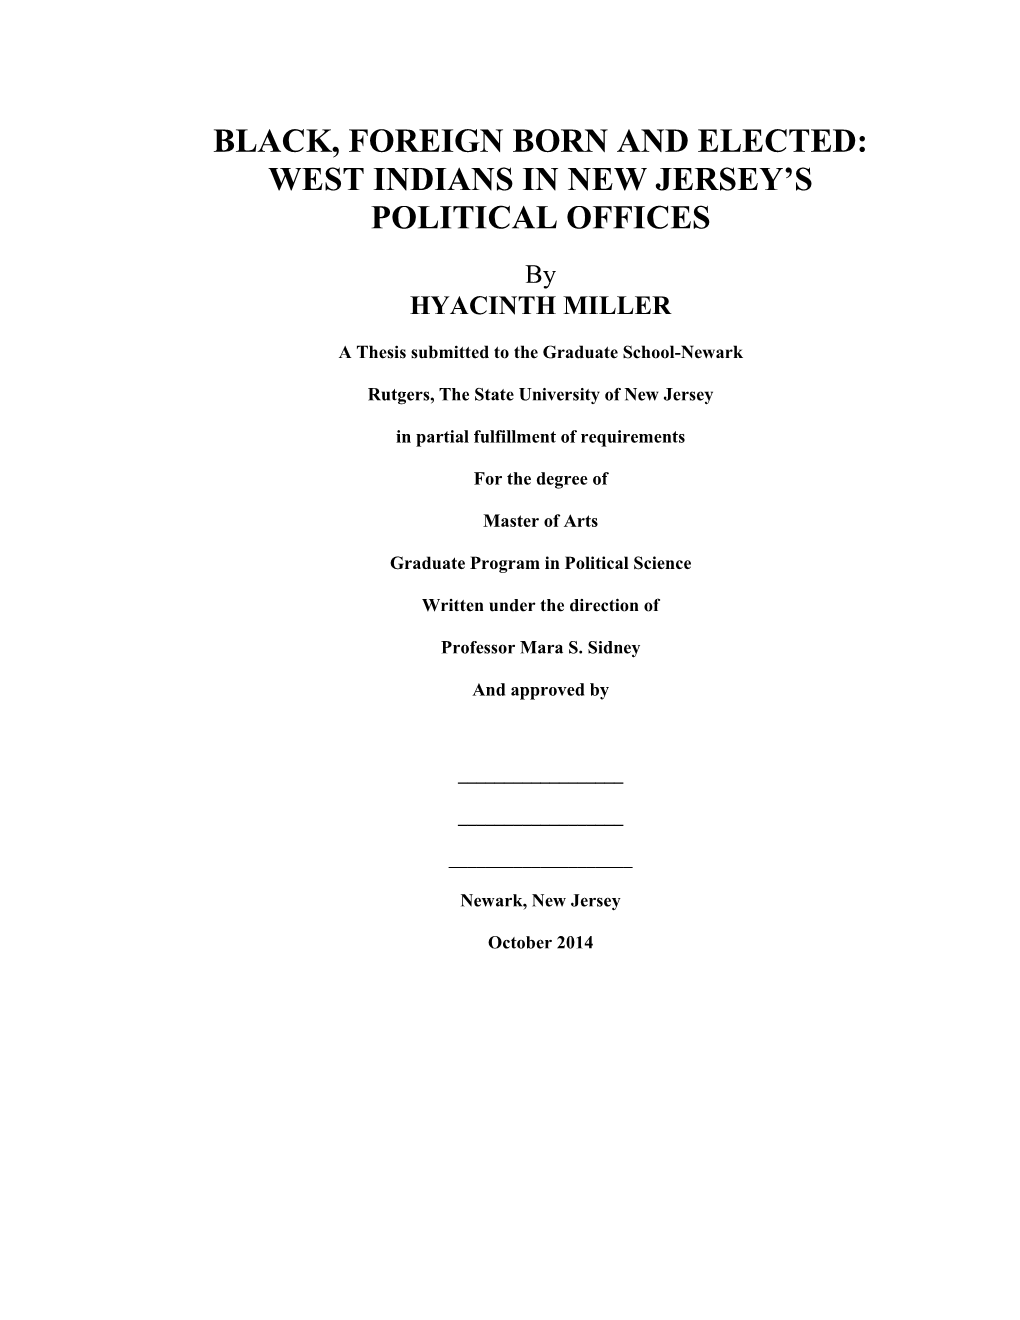 West Indians in New Jersey's Political Offic